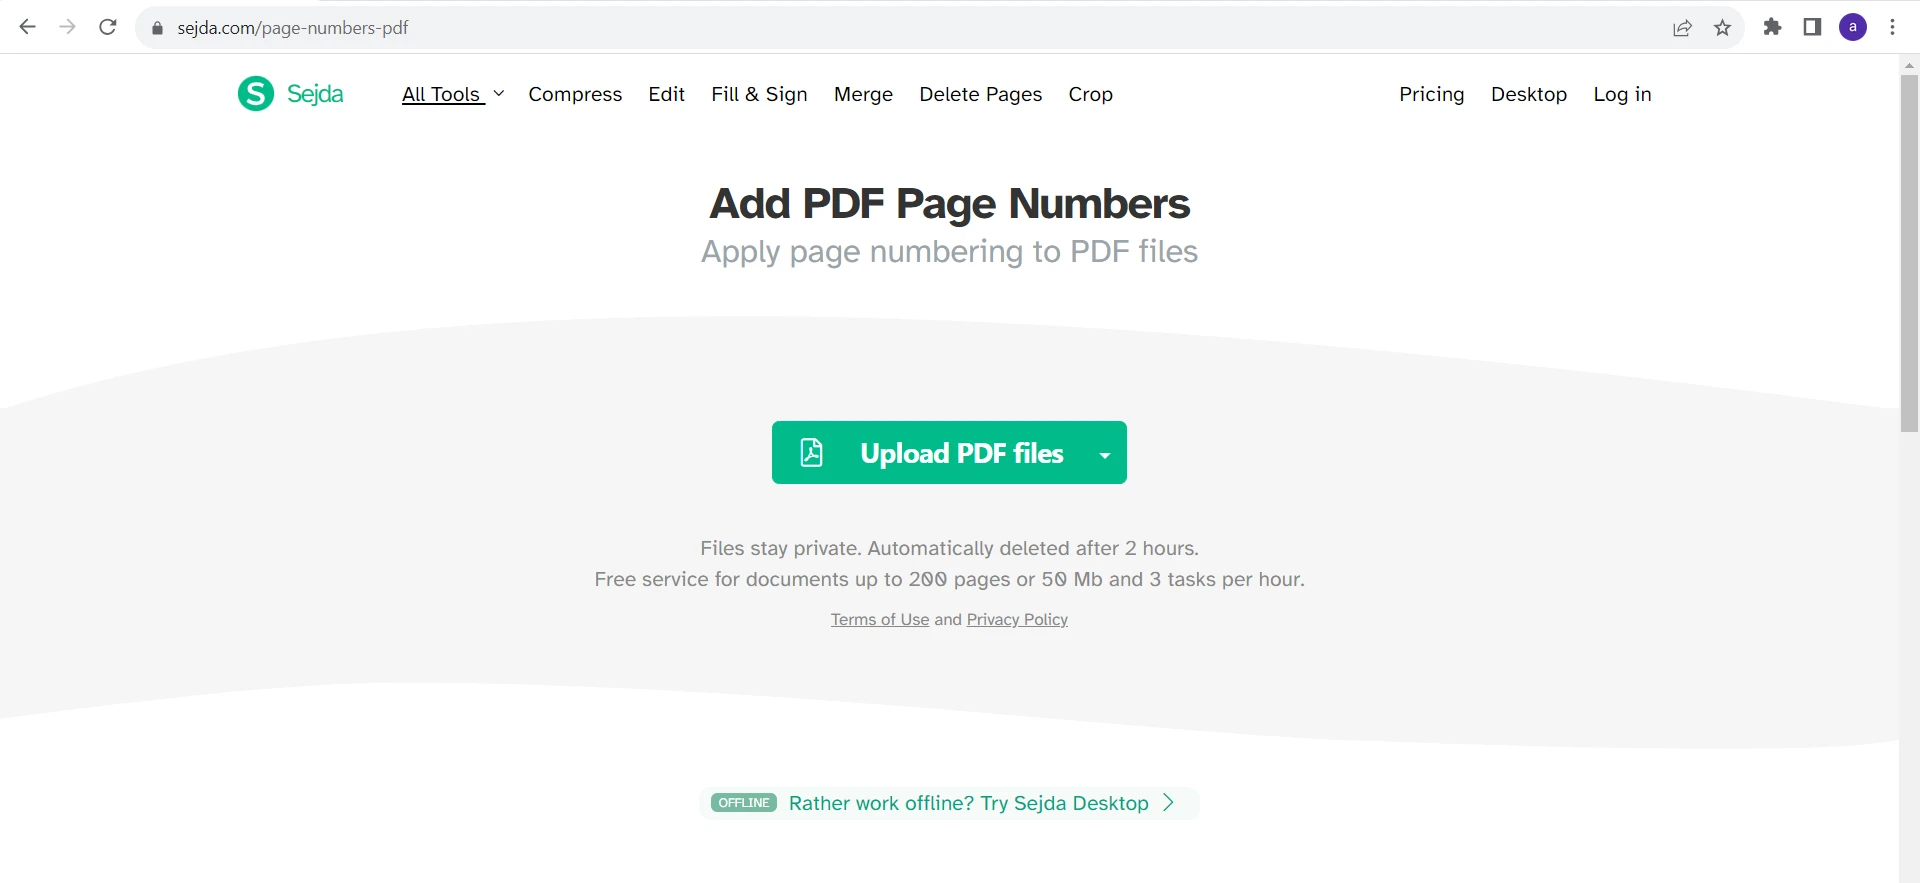 How to Add Page Numbers To a PDF: Figure 3